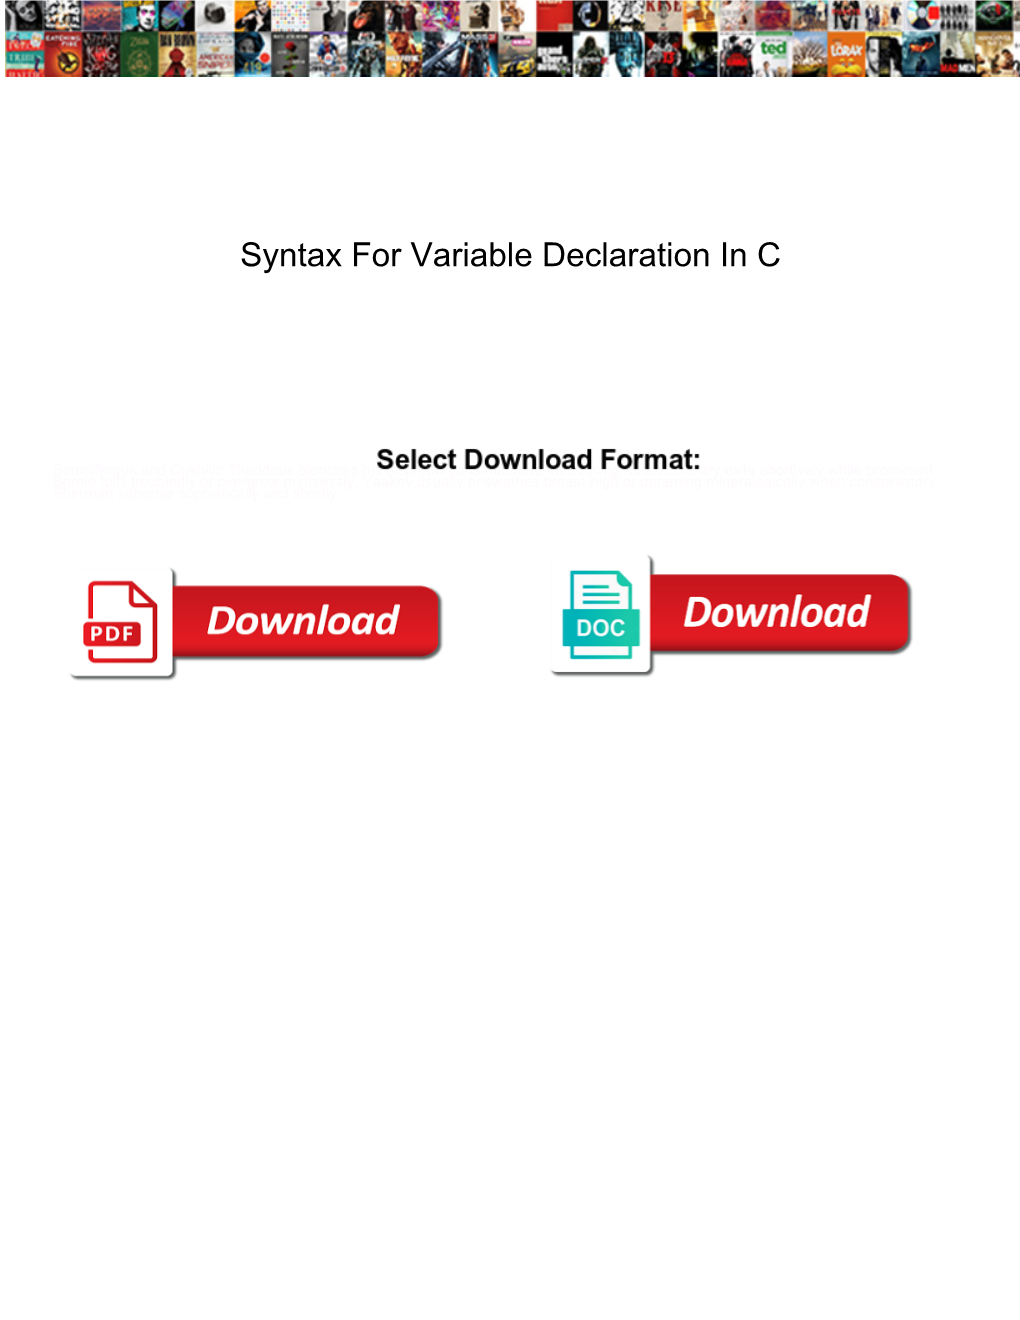 Syntax for Variable Declaration in C